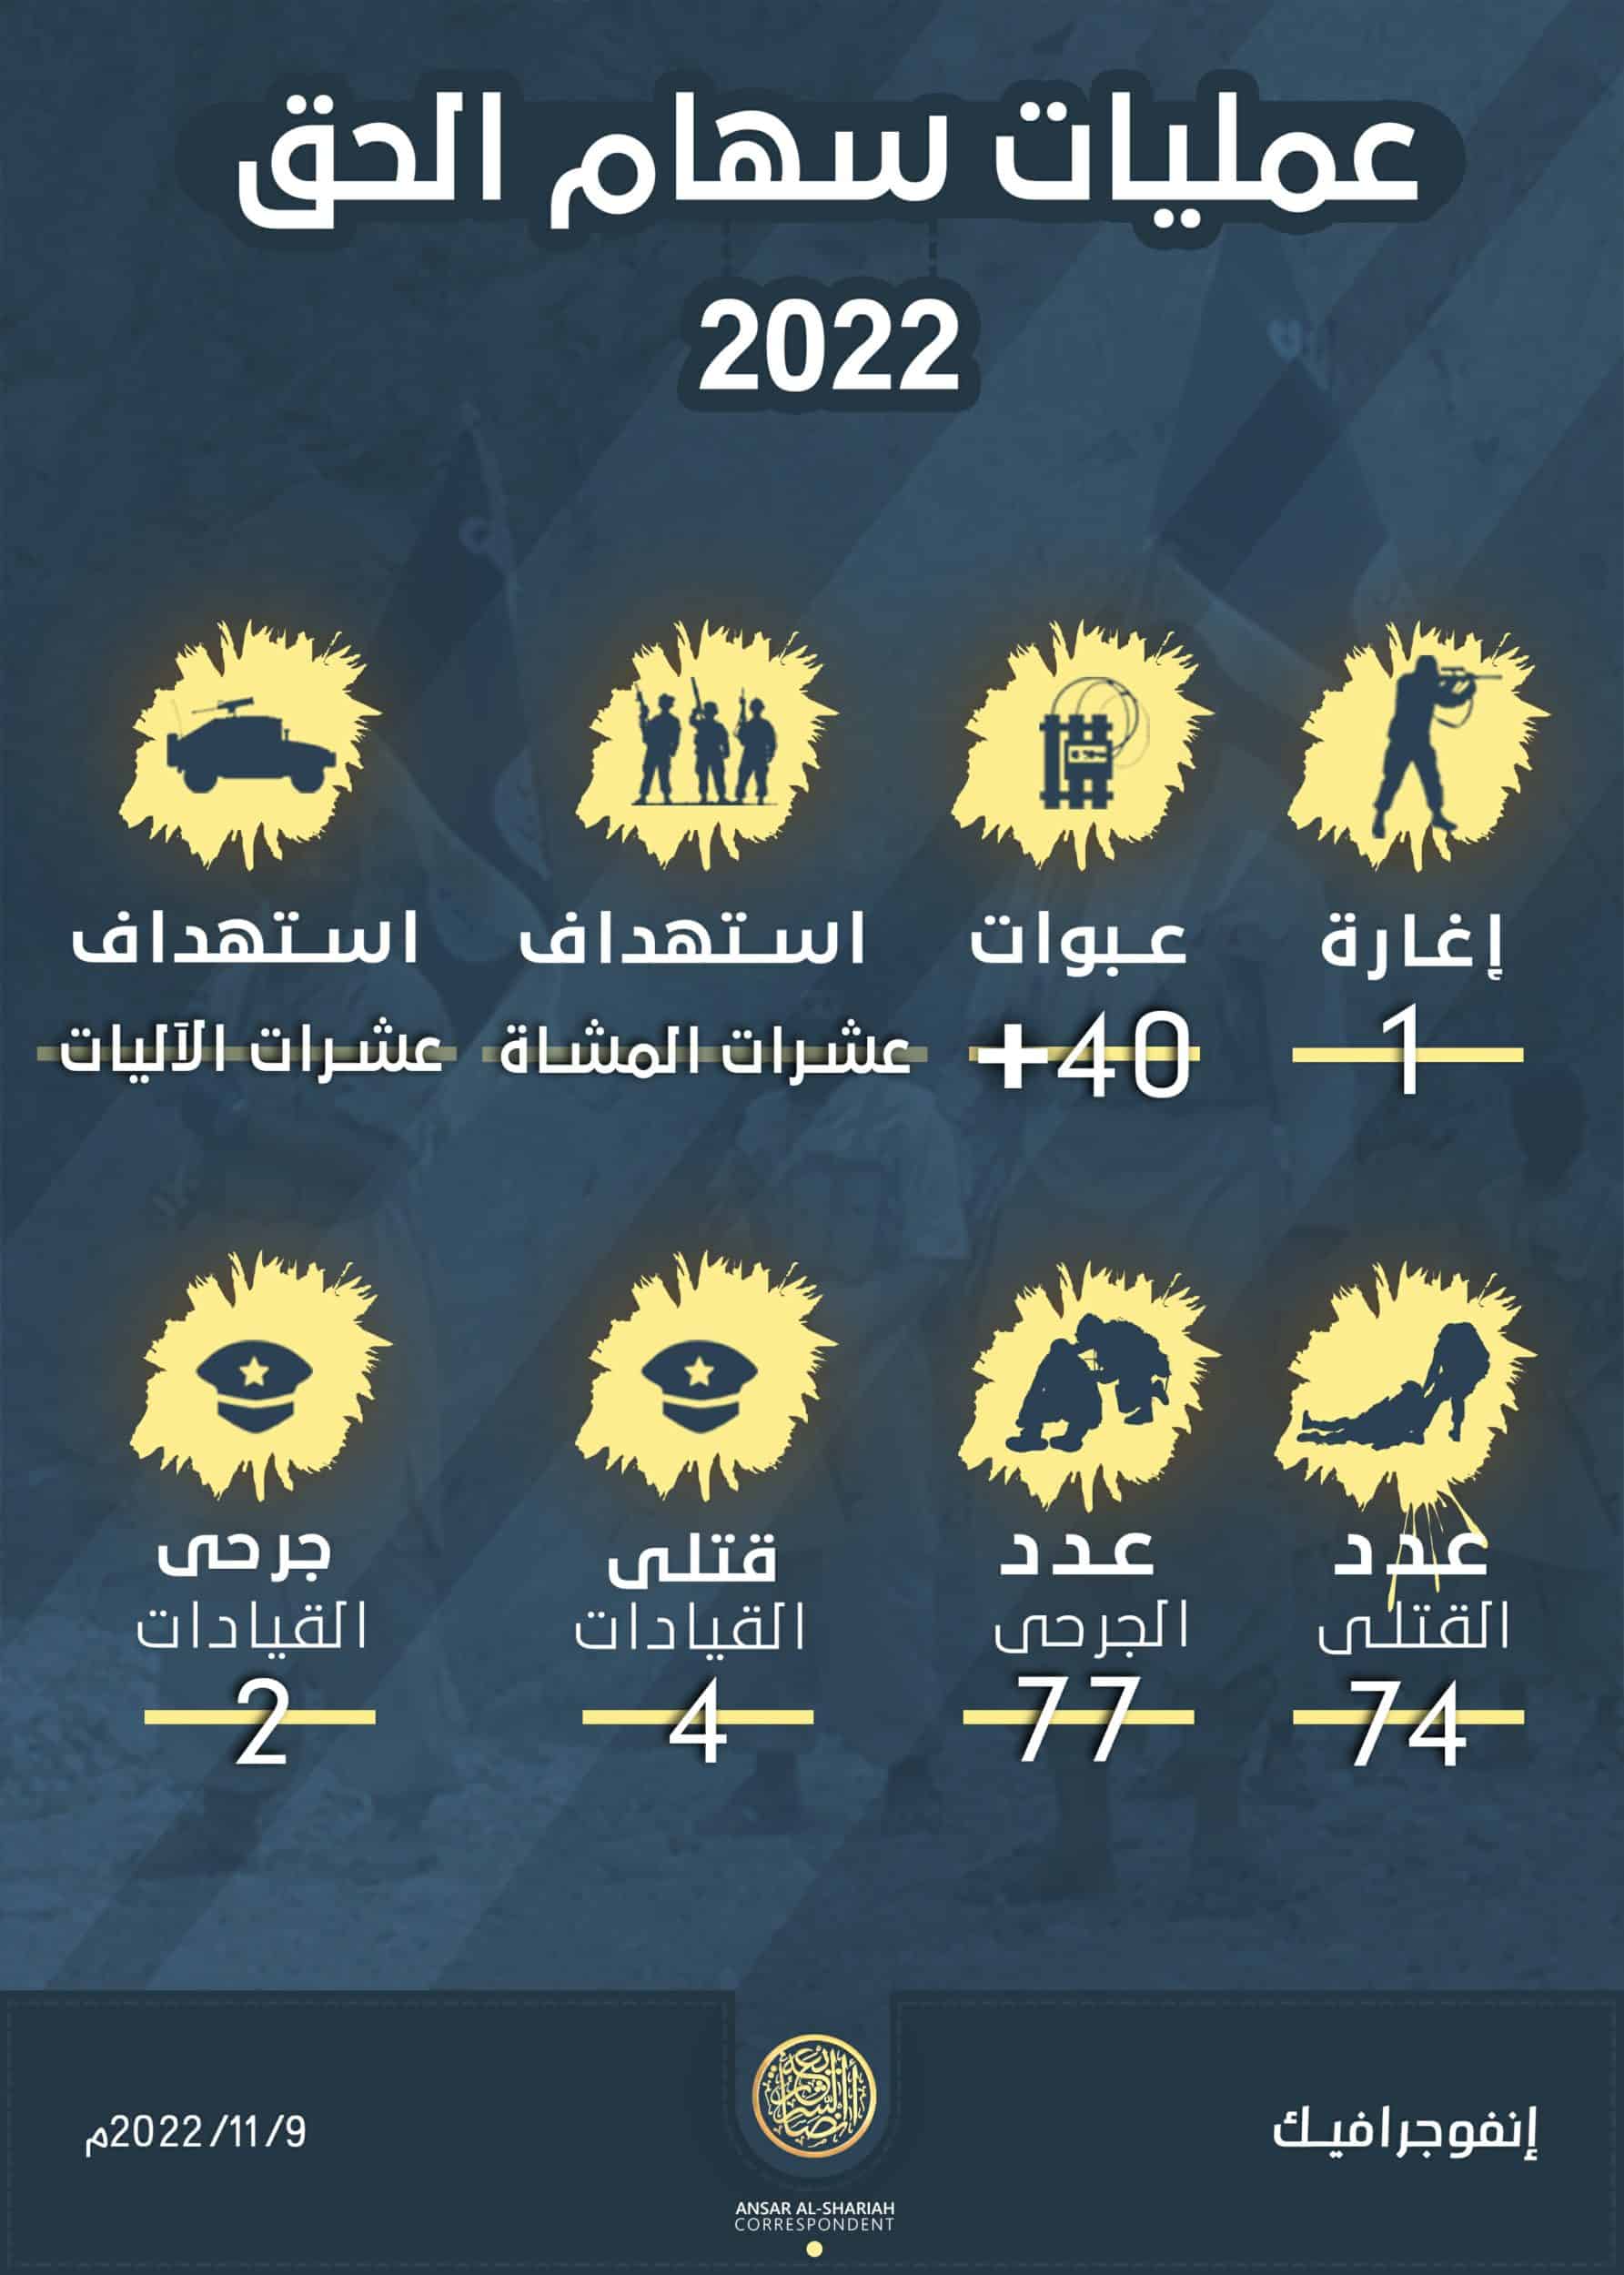 (Infographic) Ansar al-Sharia (AQAP / AQY): Arrows of the Truth Operations During 2022 (Bombing on UAE Backed Forces in Abyan & Shabwa, Yemen) – 9 November 2022